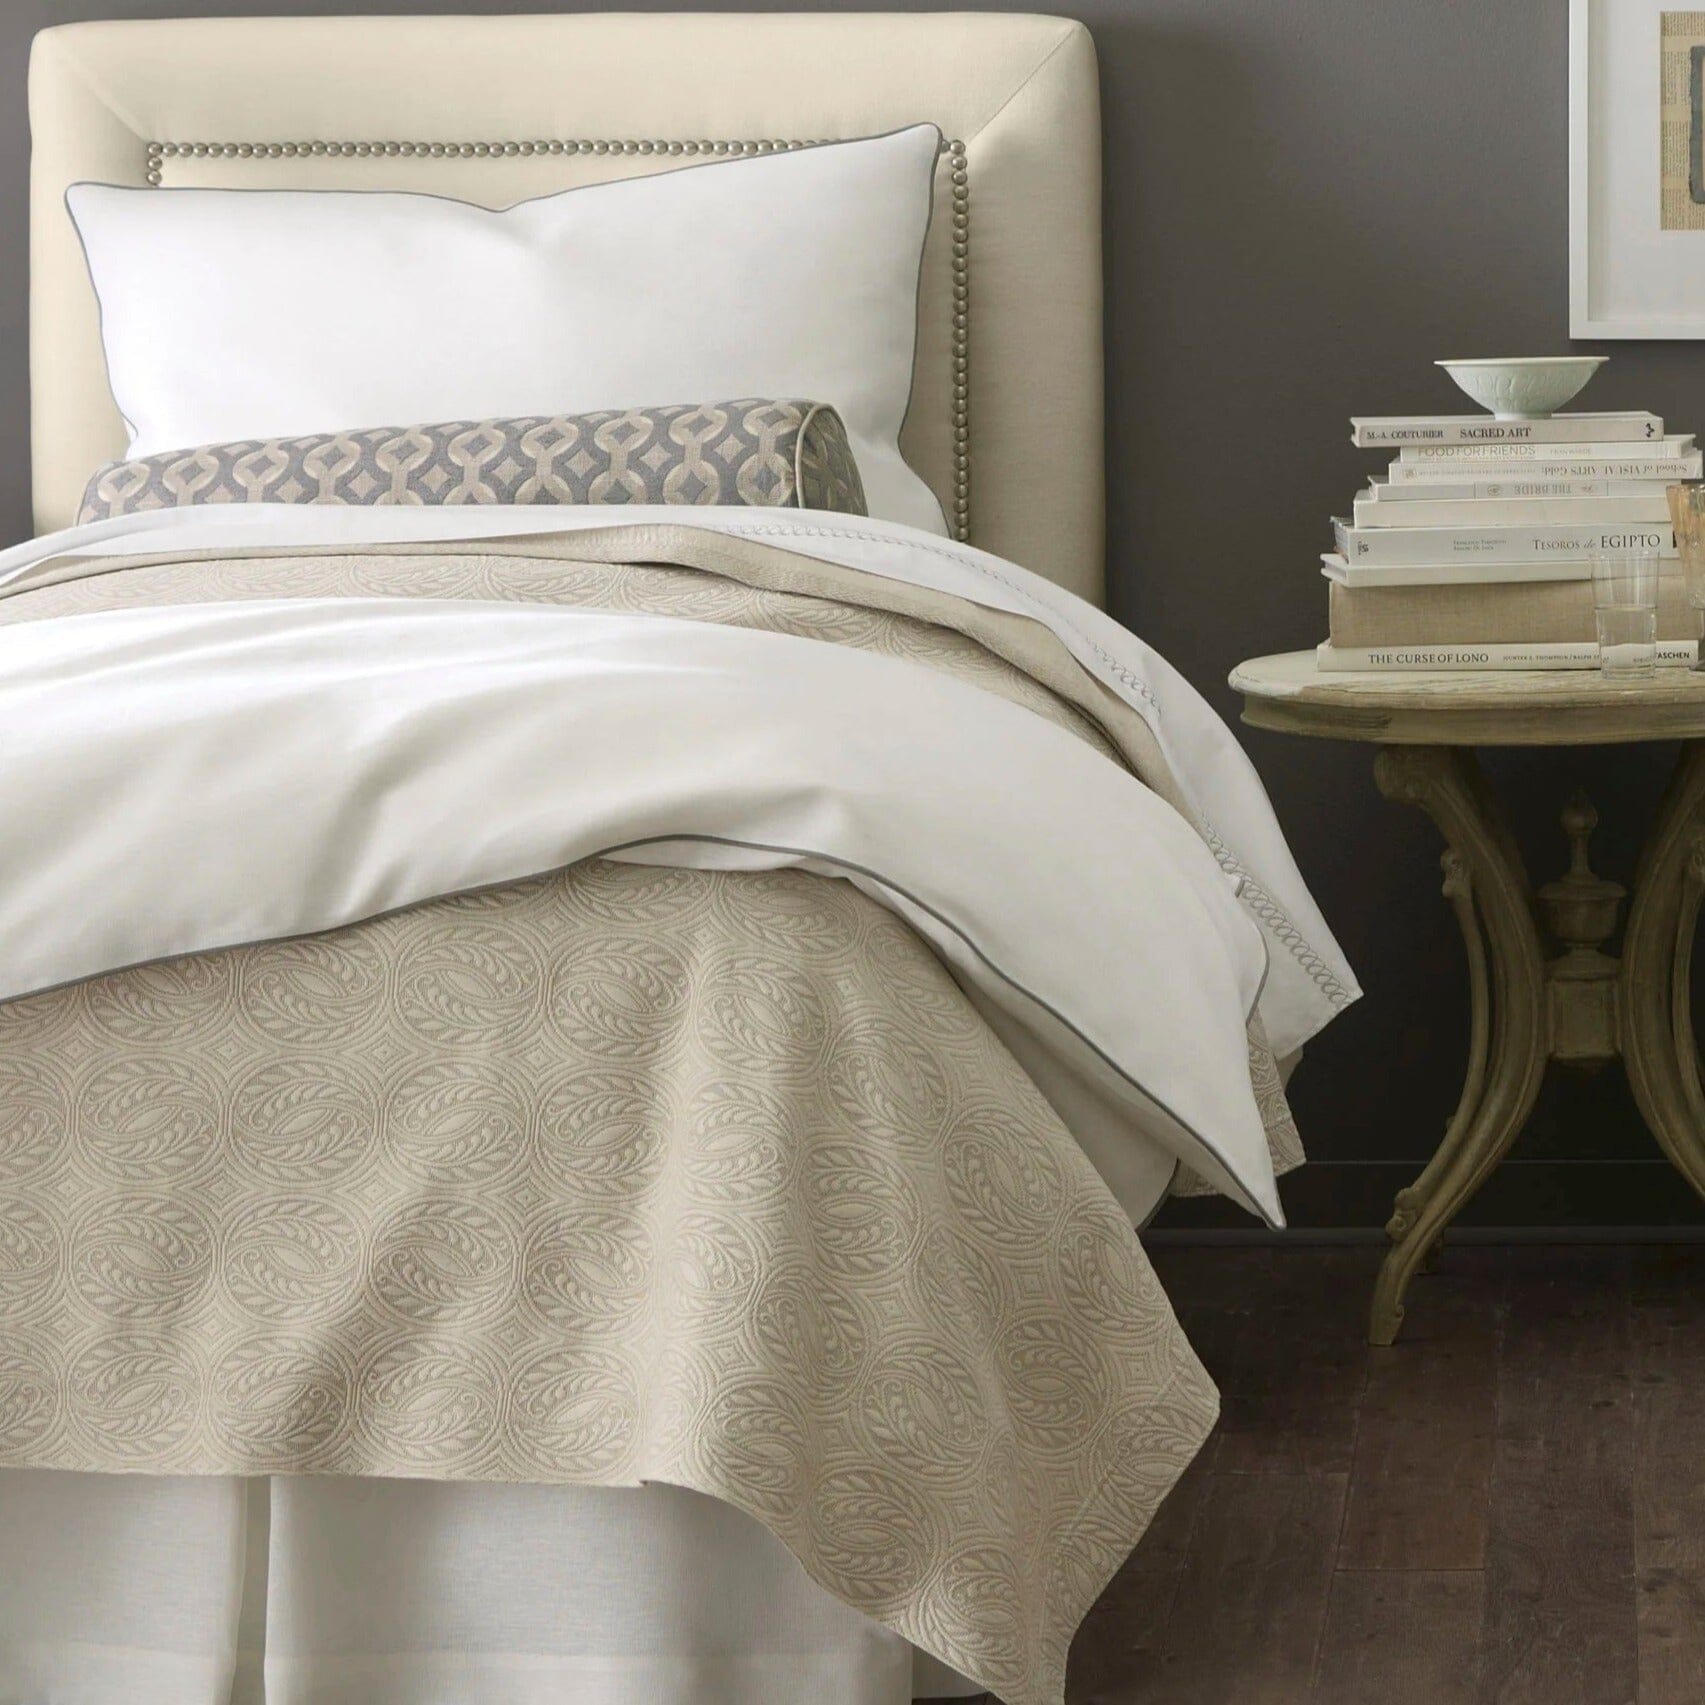 Vienna Matelasse - Peacock Alley Best Selling Lightweight Coverlet in Linen - Shown with other Bedding